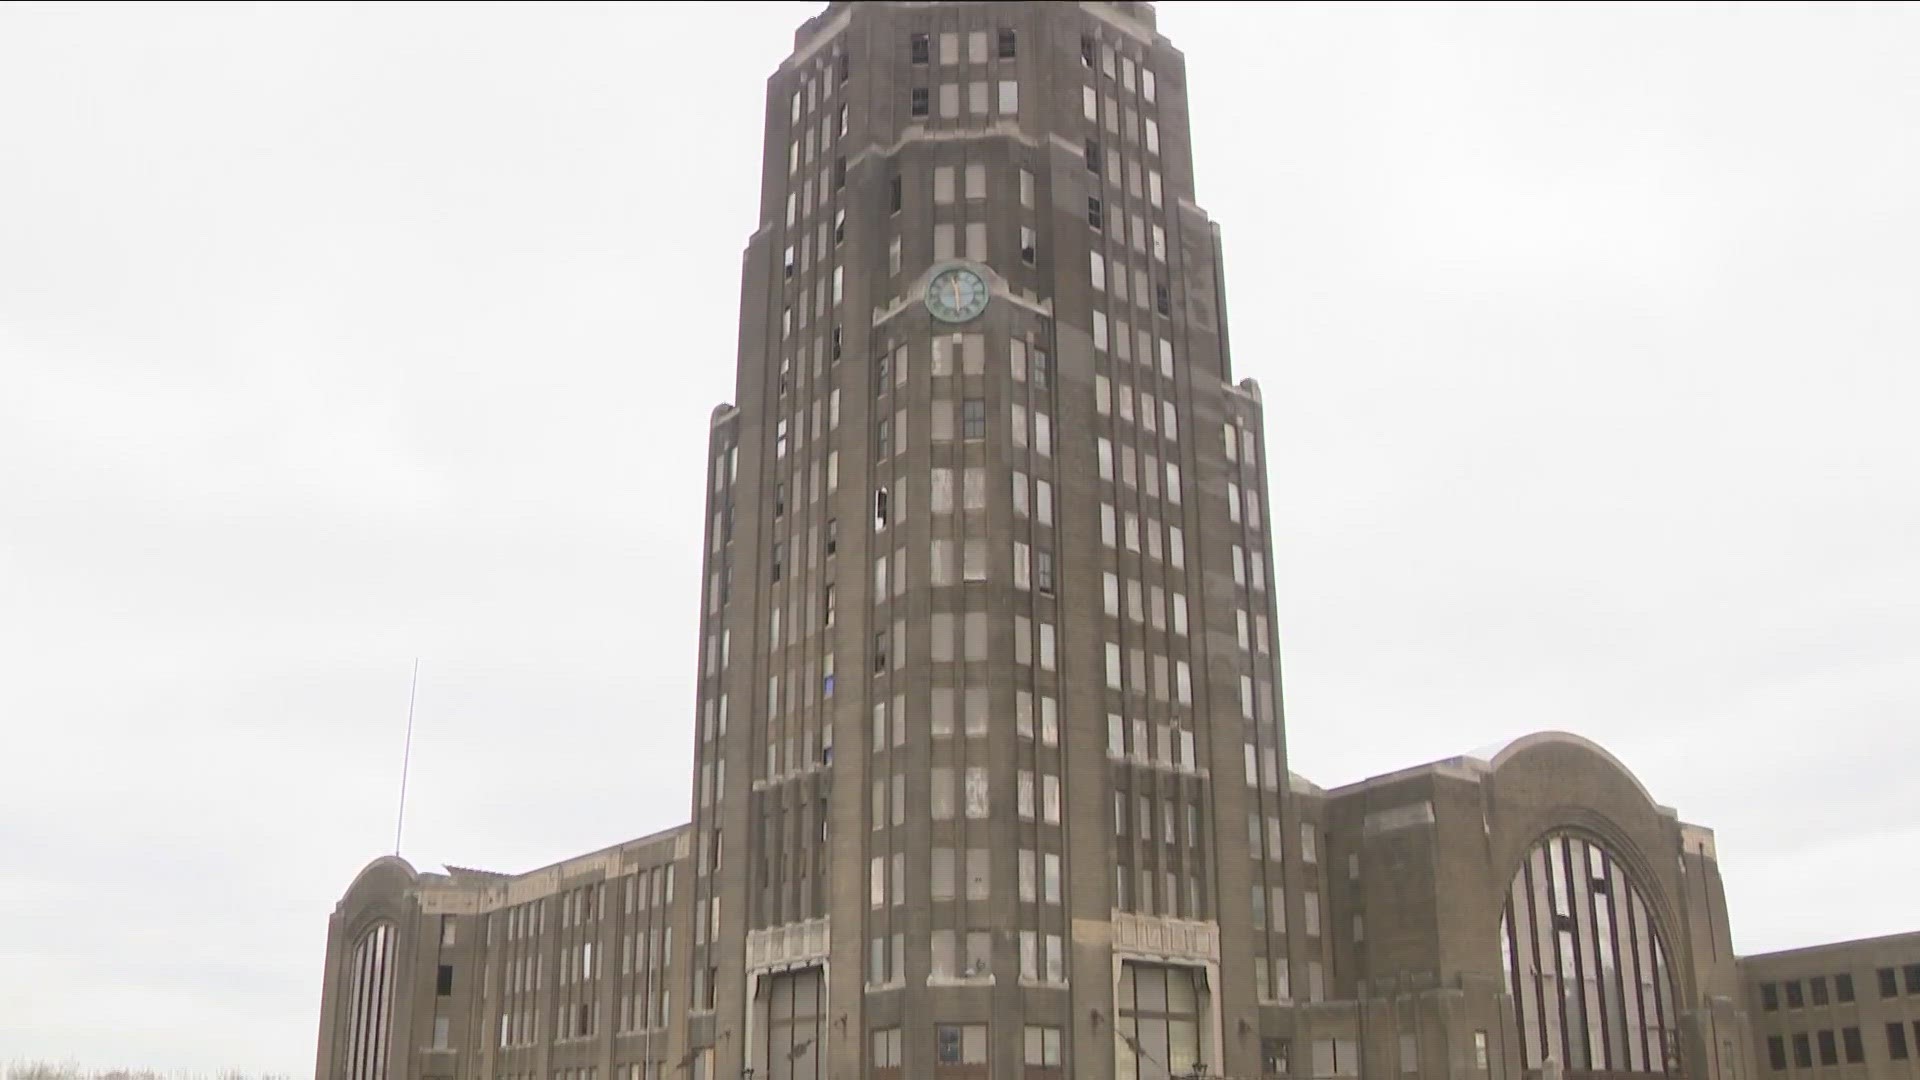 Central Terminal Restoration Corp. says momentum is building as it prepares to launch more improvements and name a developer later this year